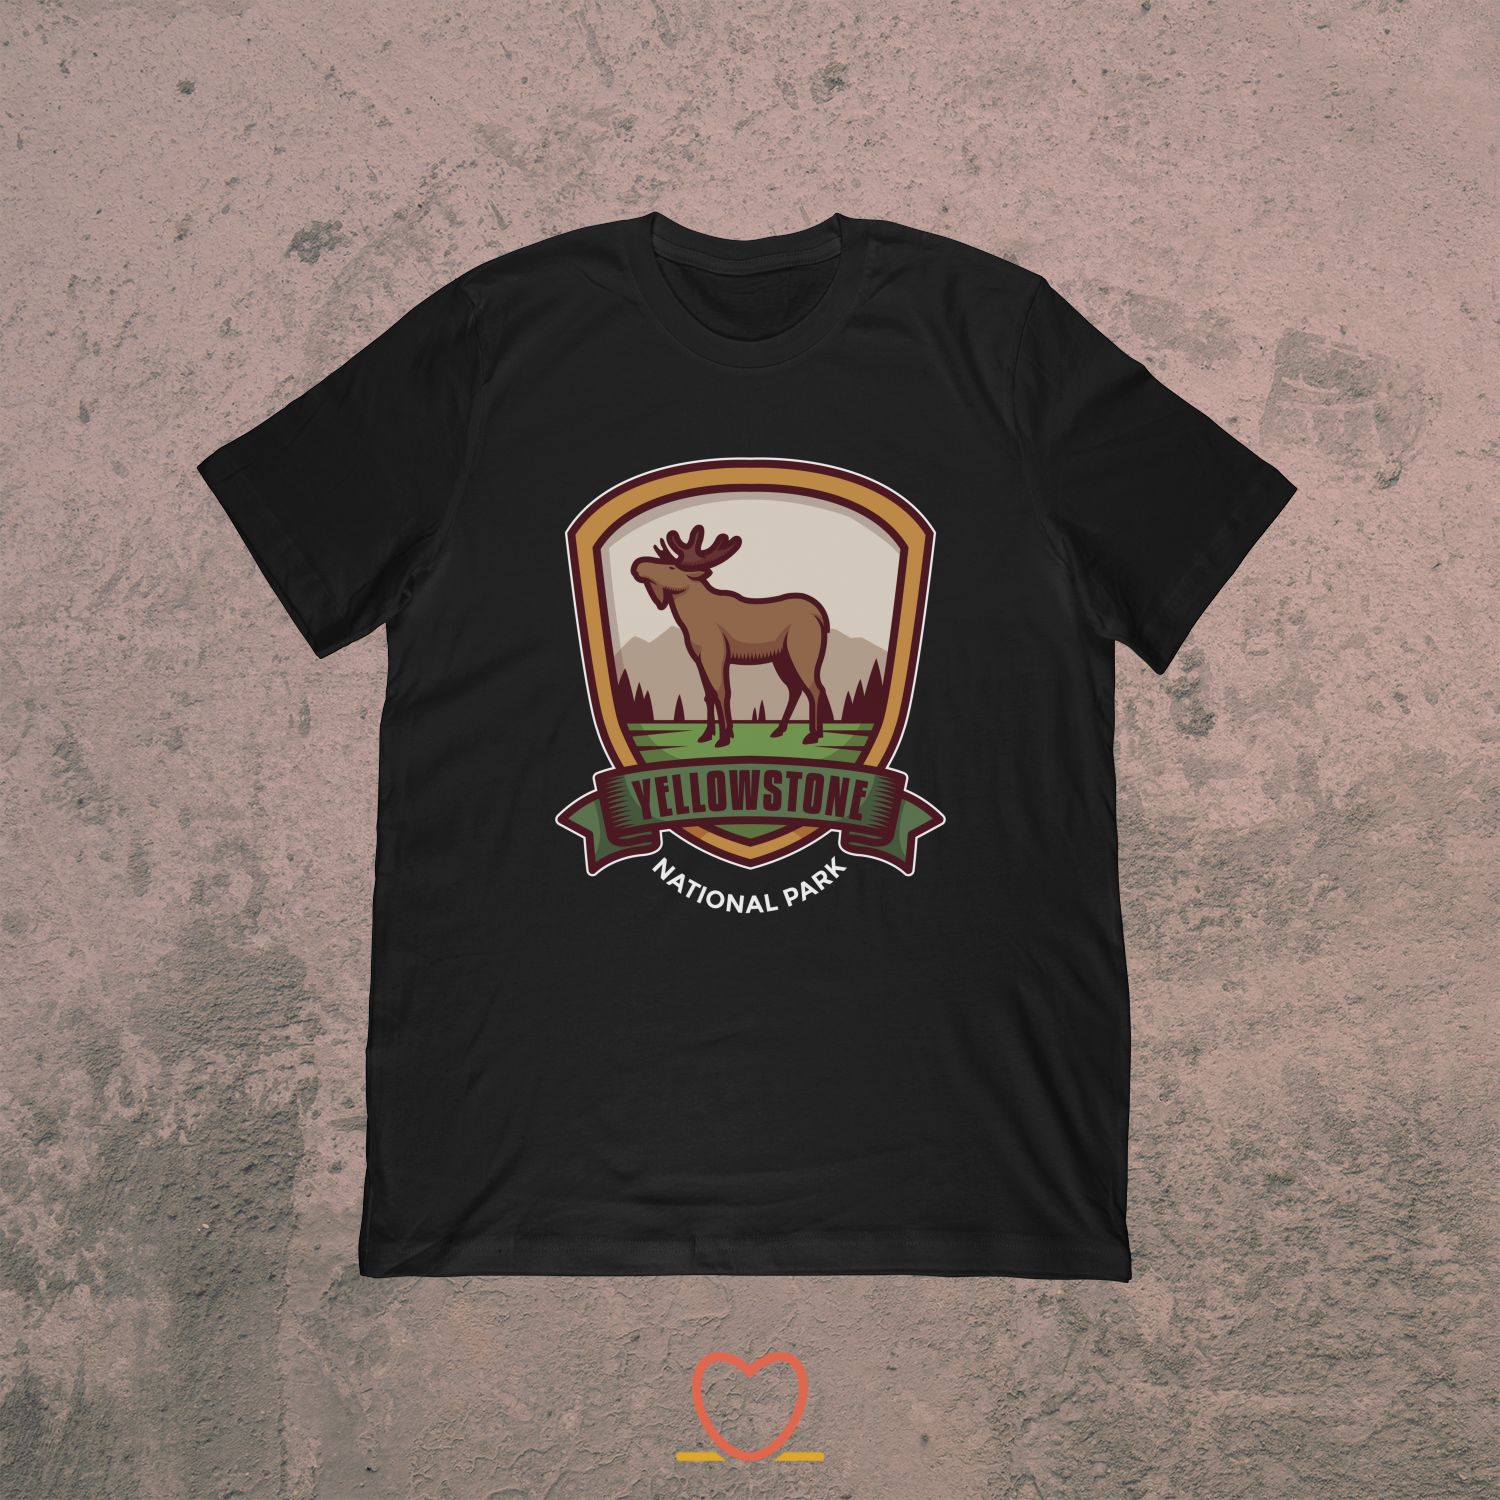 Yellowstone National Park – National Parks Tee